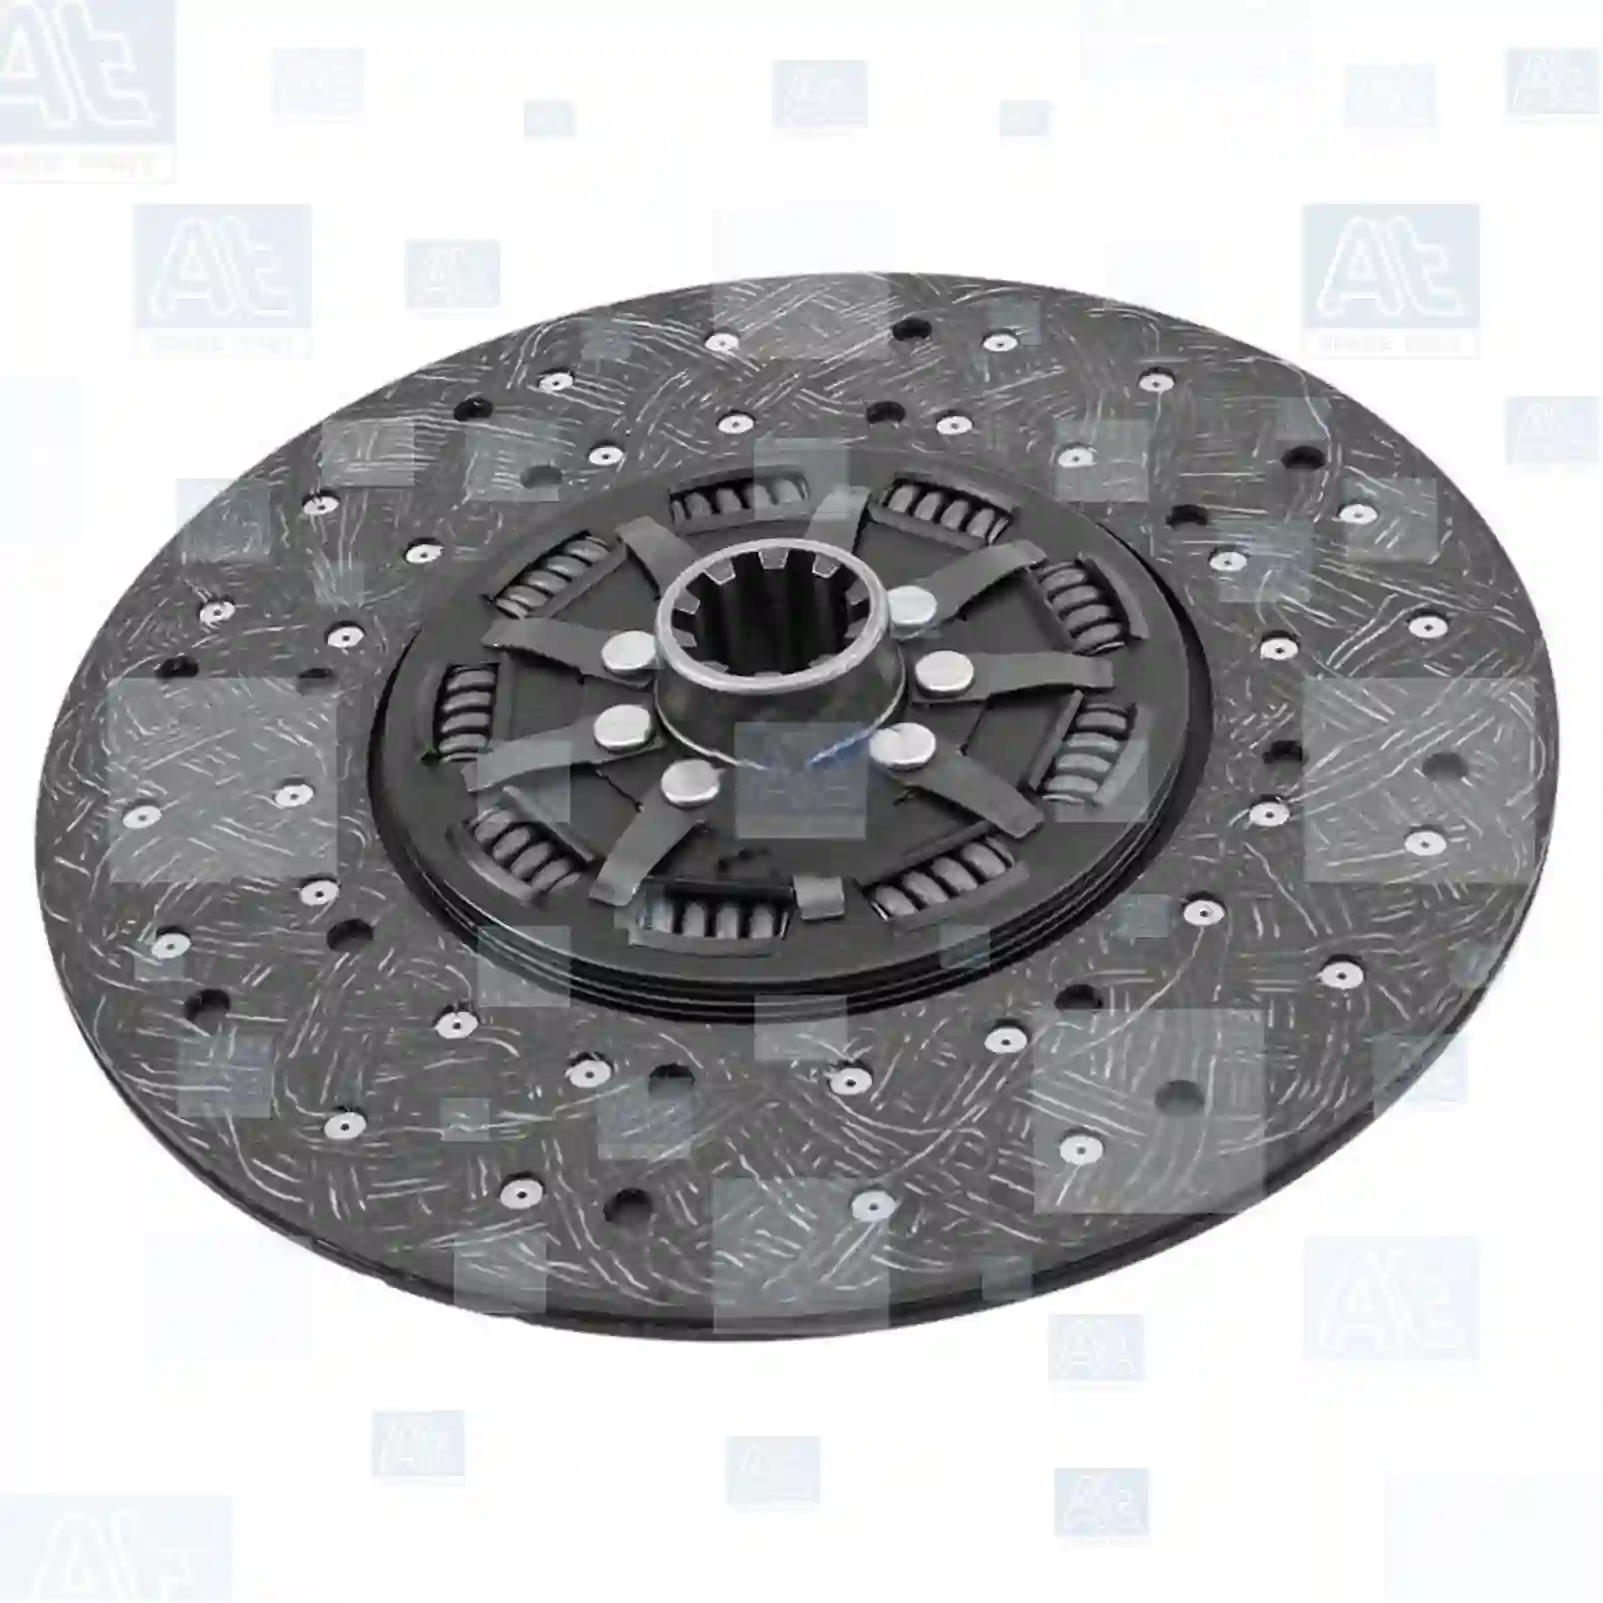 Clutch disc, 77722059, 0252683, 0740794, 0740794A, 0740794R, 252683, 362743, 373895, 623212, 740794, 740794A, 740794R, 96001, 96001A, 96001R, 42102155, 00112590, 01903854, 01903860, 01903953, 01903954, 42102155, 503134208, 0032505603, 0032506203, 0042507303, 0052501903, 0052502403, 0052503903, 0052504003, 0072503003, 0072507403, 007250740380, 0082504603, 0122506703, 0132505703, 0182503703, 0212500503, 8383276000, 011009733, 040111301, 8383276000 ||  77722059 At Spare Part | Engine, Accelerator Pedal, Camshaft, Connecting Rod, Crankcase, Crankshaft, Cylinder Head, Engine Suspension Mountings, Exhaust Manifold, Exhaust Gas Recirculation, Filter Kits, Flywheel Housing, General Overhaul Kits, Engine, Intake Manifold, Oil Cleaner, Oil Cooler, Oil Filter, Oil Pump, Oil Sump, Piston & Liner, Sensor & Switch, Timing Case, Turbocharger, Cooling System, Belt Tensioner, Coolant Filter, Coolant Pipe, Corrosion Prevention Agent, Drive, Expansion Tank, Fan, Intercooler, Monitors & Gauges, Radiator, Thermostat, V-Belt / Timing belt, Water Pump, Fuel System, Electronical Injector Unit, Feed Pump, Fuel Filter, cpl., Fuel Gauge Sender,  Fuel Line, Fuel Pump, Fuel Tank, Injection Line Kit, Injection Pump, Exhaust System, Clutch & Pedal, Gearbox, Propeller Shaft, Axles, Brake System, Hubs & Wheels, Suspension, Leaf Spring, Universal Parts / Accessories, Steering, Electrical System, Cabin Clutch disc, 77722059, 0252683, 0740794, 0740794A, 0740794R, 252683, 362743, 373895, 623212, 740794, 740794A, 740794R, 96001, 96001A, 96001R, 42102155, 00112590, 01903854, 01903860, 01903953, 01903954, 42102155, 503134208, 0032505603, 0032506203, 0042507303, 0052501903, 0052502403, 0052503903, 0052504003, 0072503003, 0072507403, 007250740380, 0082504603, 0122506703, 0132505703, 0182503703, 0212500503, 8383276000, 011009733, 040111301, 8383276000 ||  77722059 At Spare Part | Engine, Accelerator Pedal, Camshaft, Connecting Rod, Crankcase, Crankshaft, Cylinder Head, Engine Suspension Mountings, Exhaust Manifold, Exhaust Gas Recirculation, Filter Kits, Flywheel Housing, General Overhaul Kits, Engine, Intake Manifold, Oil Cleaner, Oil Cooler, Oil Filter, Oil Pump, Oil Sump, Piston & Liner, Sensor & Switch, Timing Case, Turbocharger, Cooling System, Belt Tensioner, Coolant Filter, Coolant Pipe, Corrosion Prevention Agent, Drive, Expansion Tank, Fan, Intercooler, Monitors & Gauges, Radiator, Thermostat, V-Belt / Timing belt, Water Pump, Fuel System, Electronical Injector Unit, Feed Pump, Fuel Filter, cpl., Fuel Gauge Sender,  Fuel Line, Fuel Pump, Fuel Tank, Injection Line Kit, Injection Pump, Exhaust System, Clutch & Pedal, Gearbox, Propeller Shaft, Axles, Brake System, Hubs & Wheels, Suspension, Leaf Spring, Universal Parts / Accessories, Steering, Electrical System, Cabin